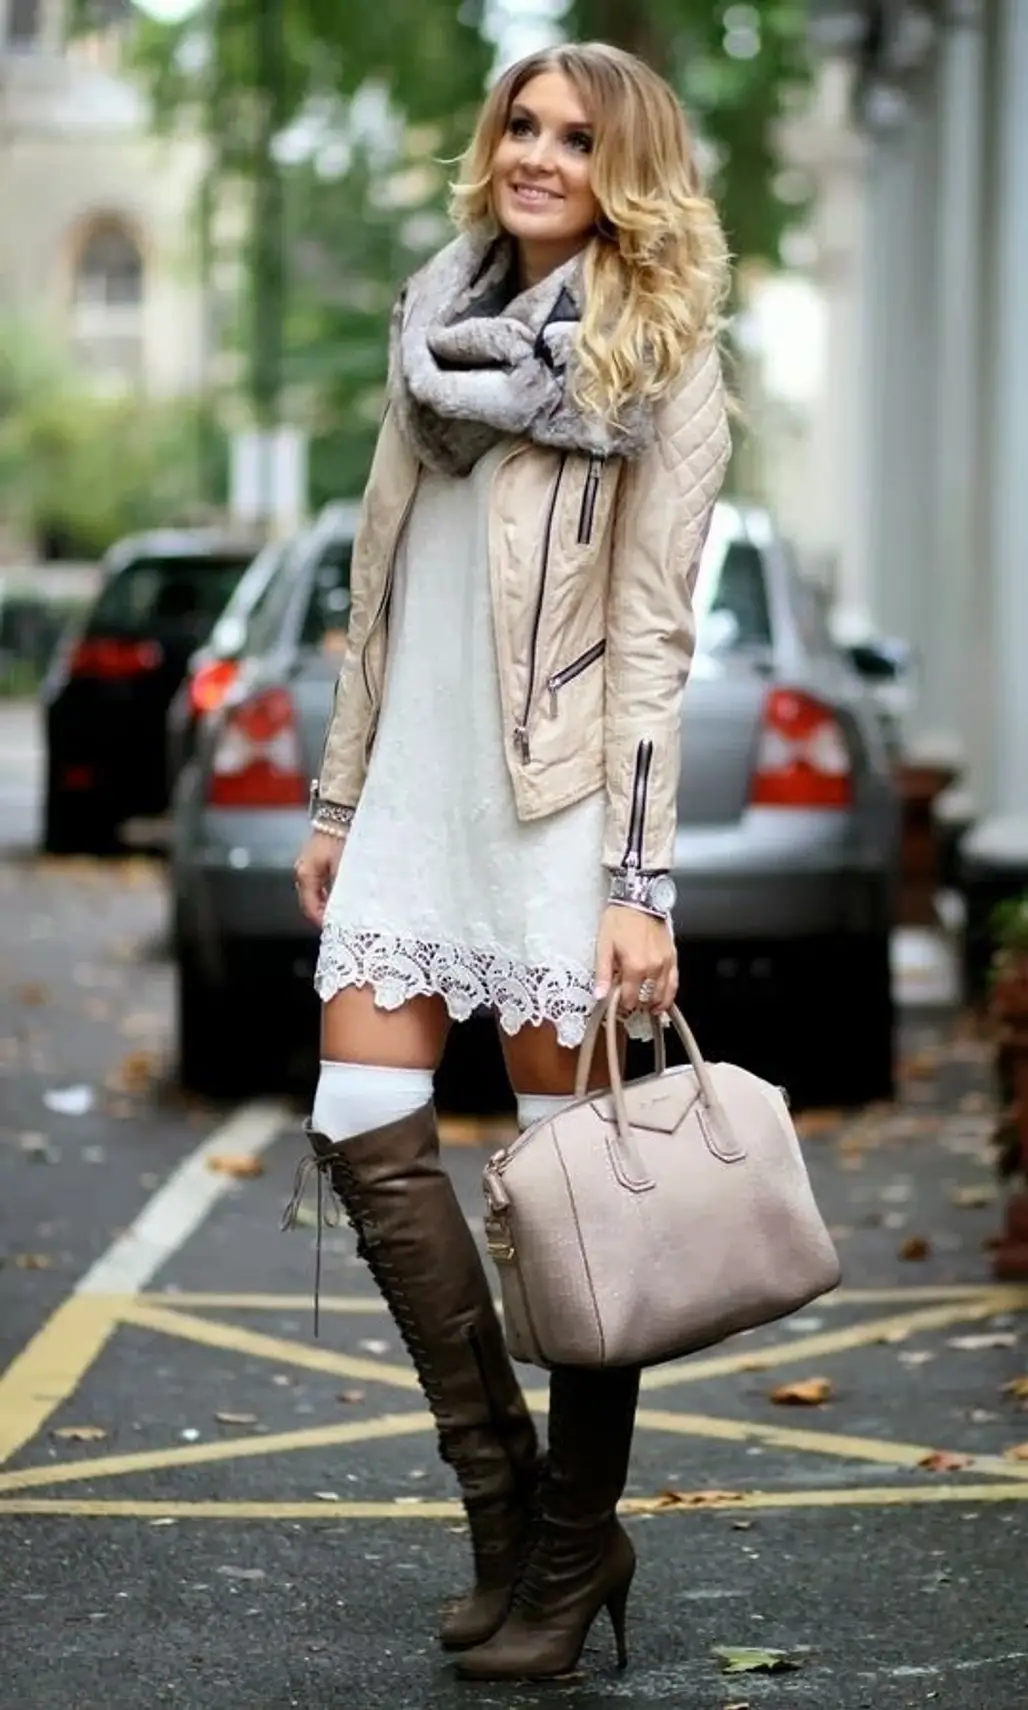 How To Wear Knee Socks This Fall  Knee High Style Guide - Cute But Crazy  Socks